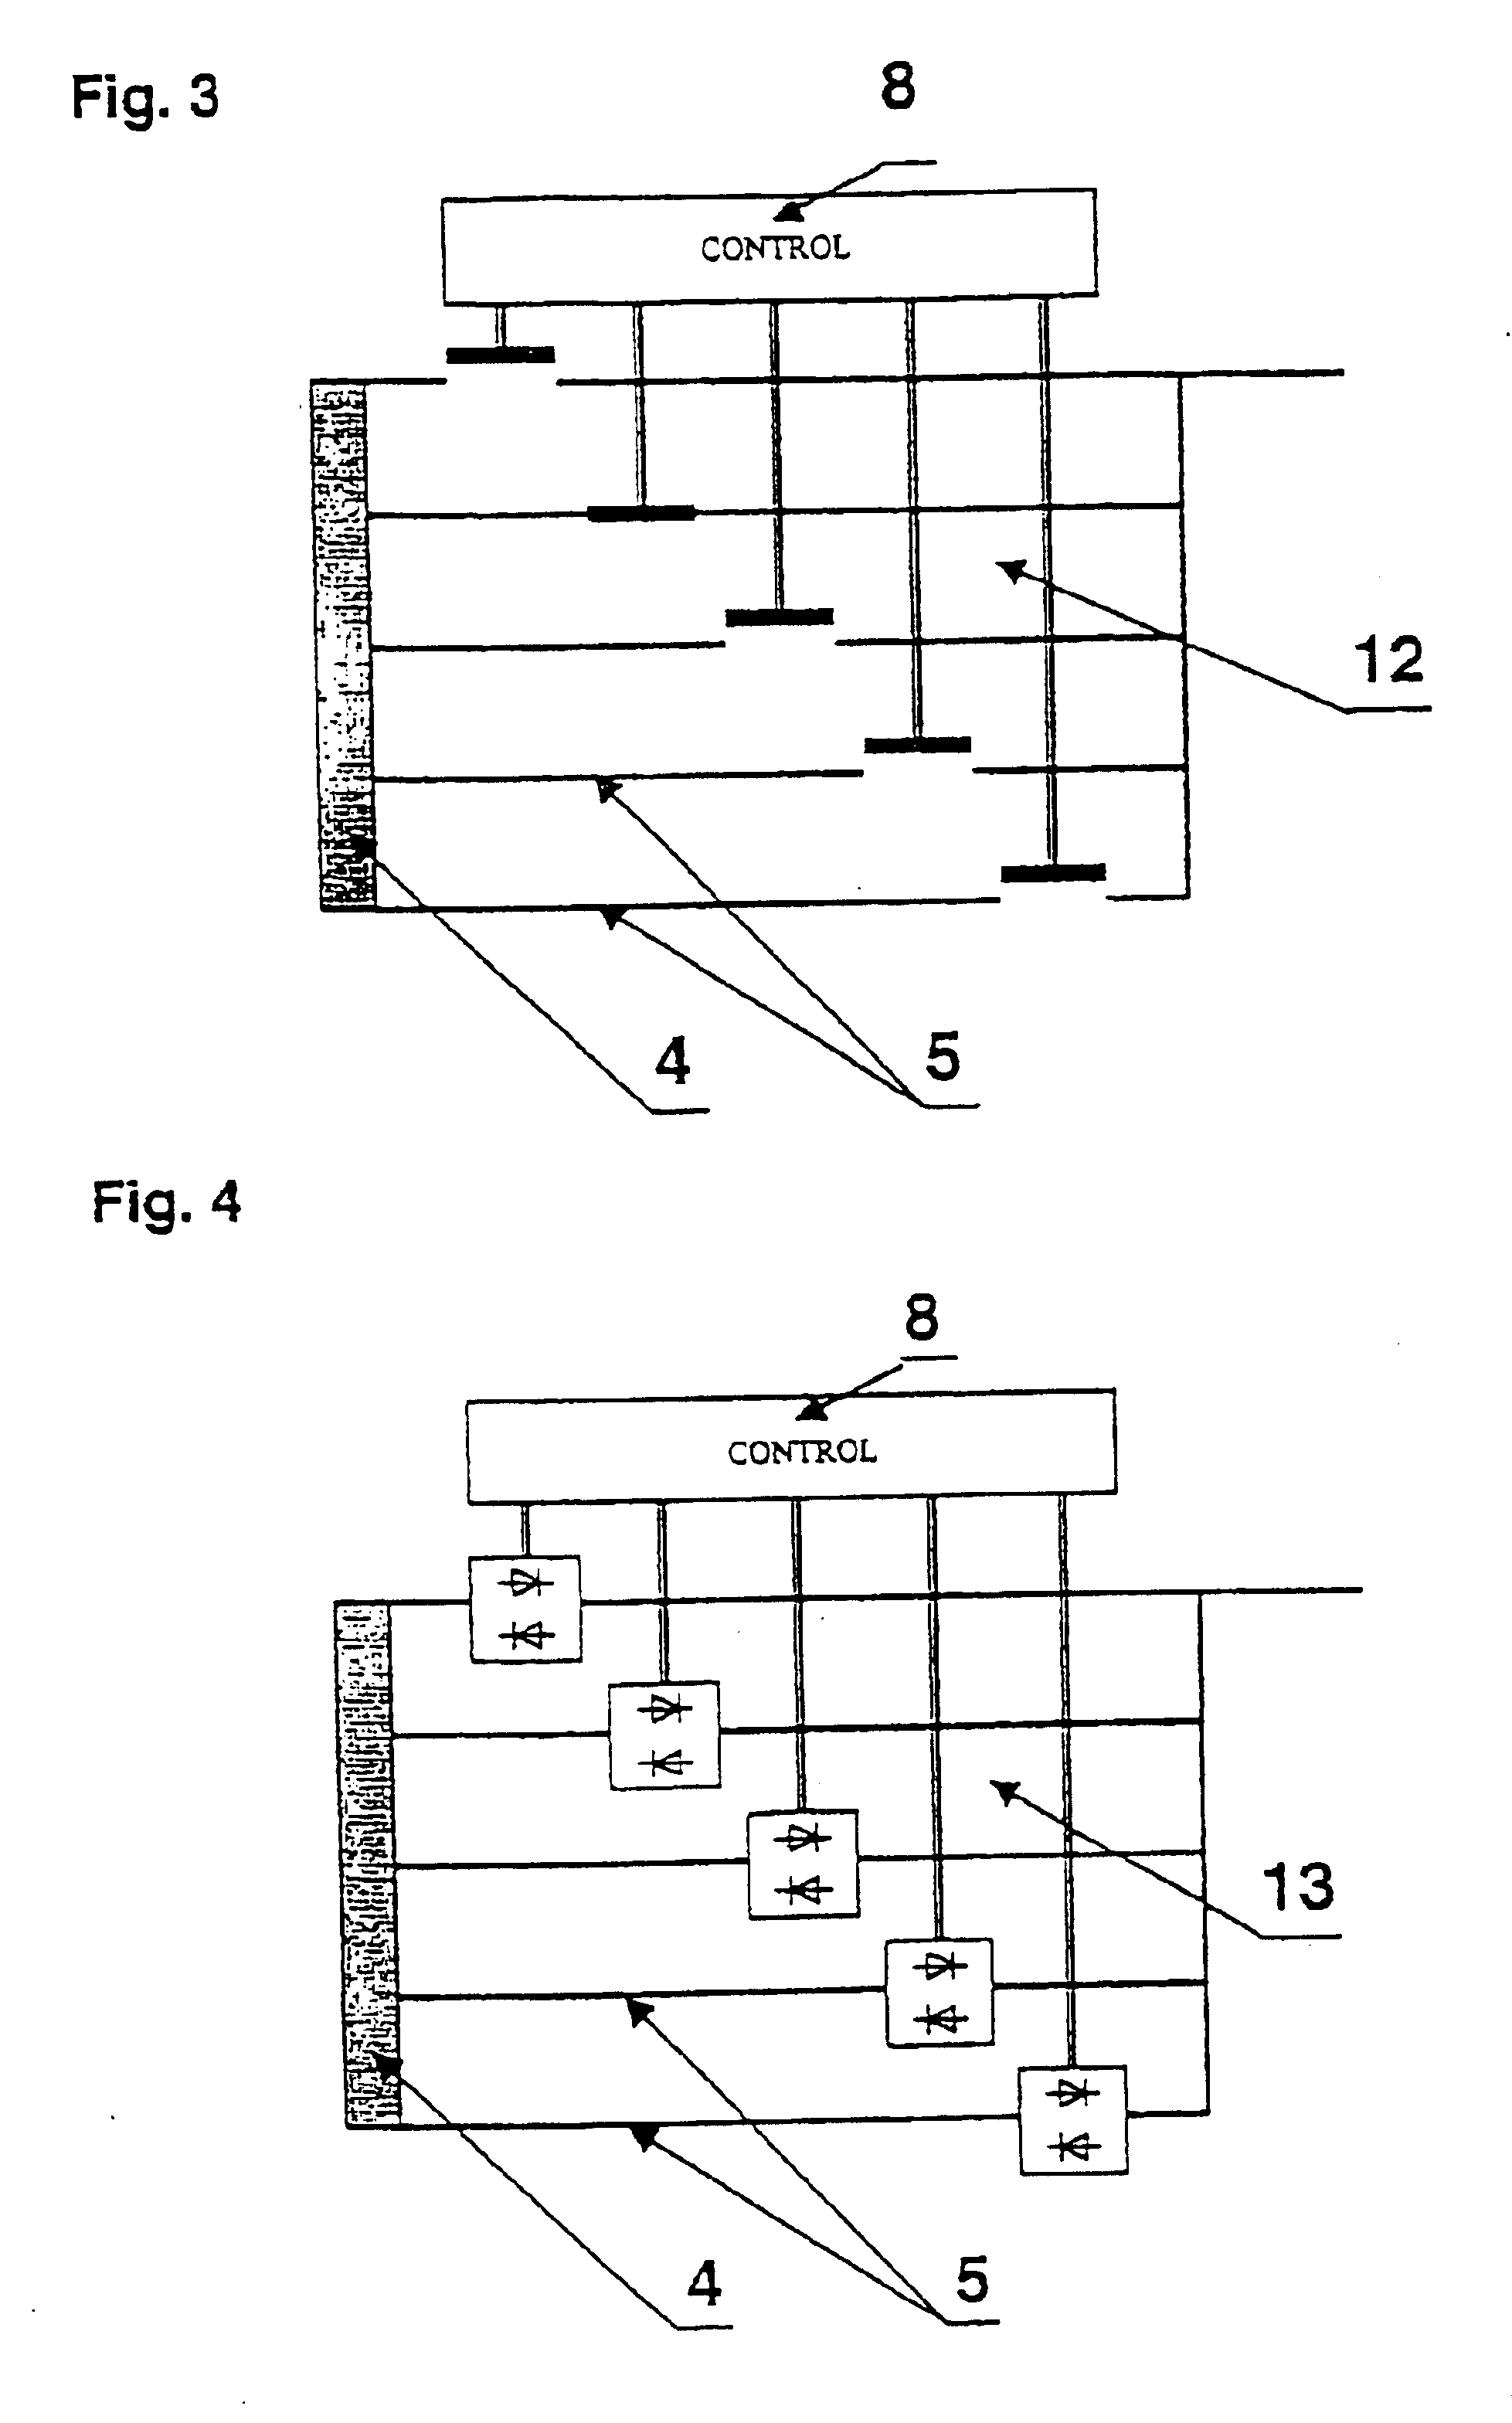 Limiting ring current in short circuits between adjacent partial windings by increasing leakage impedance